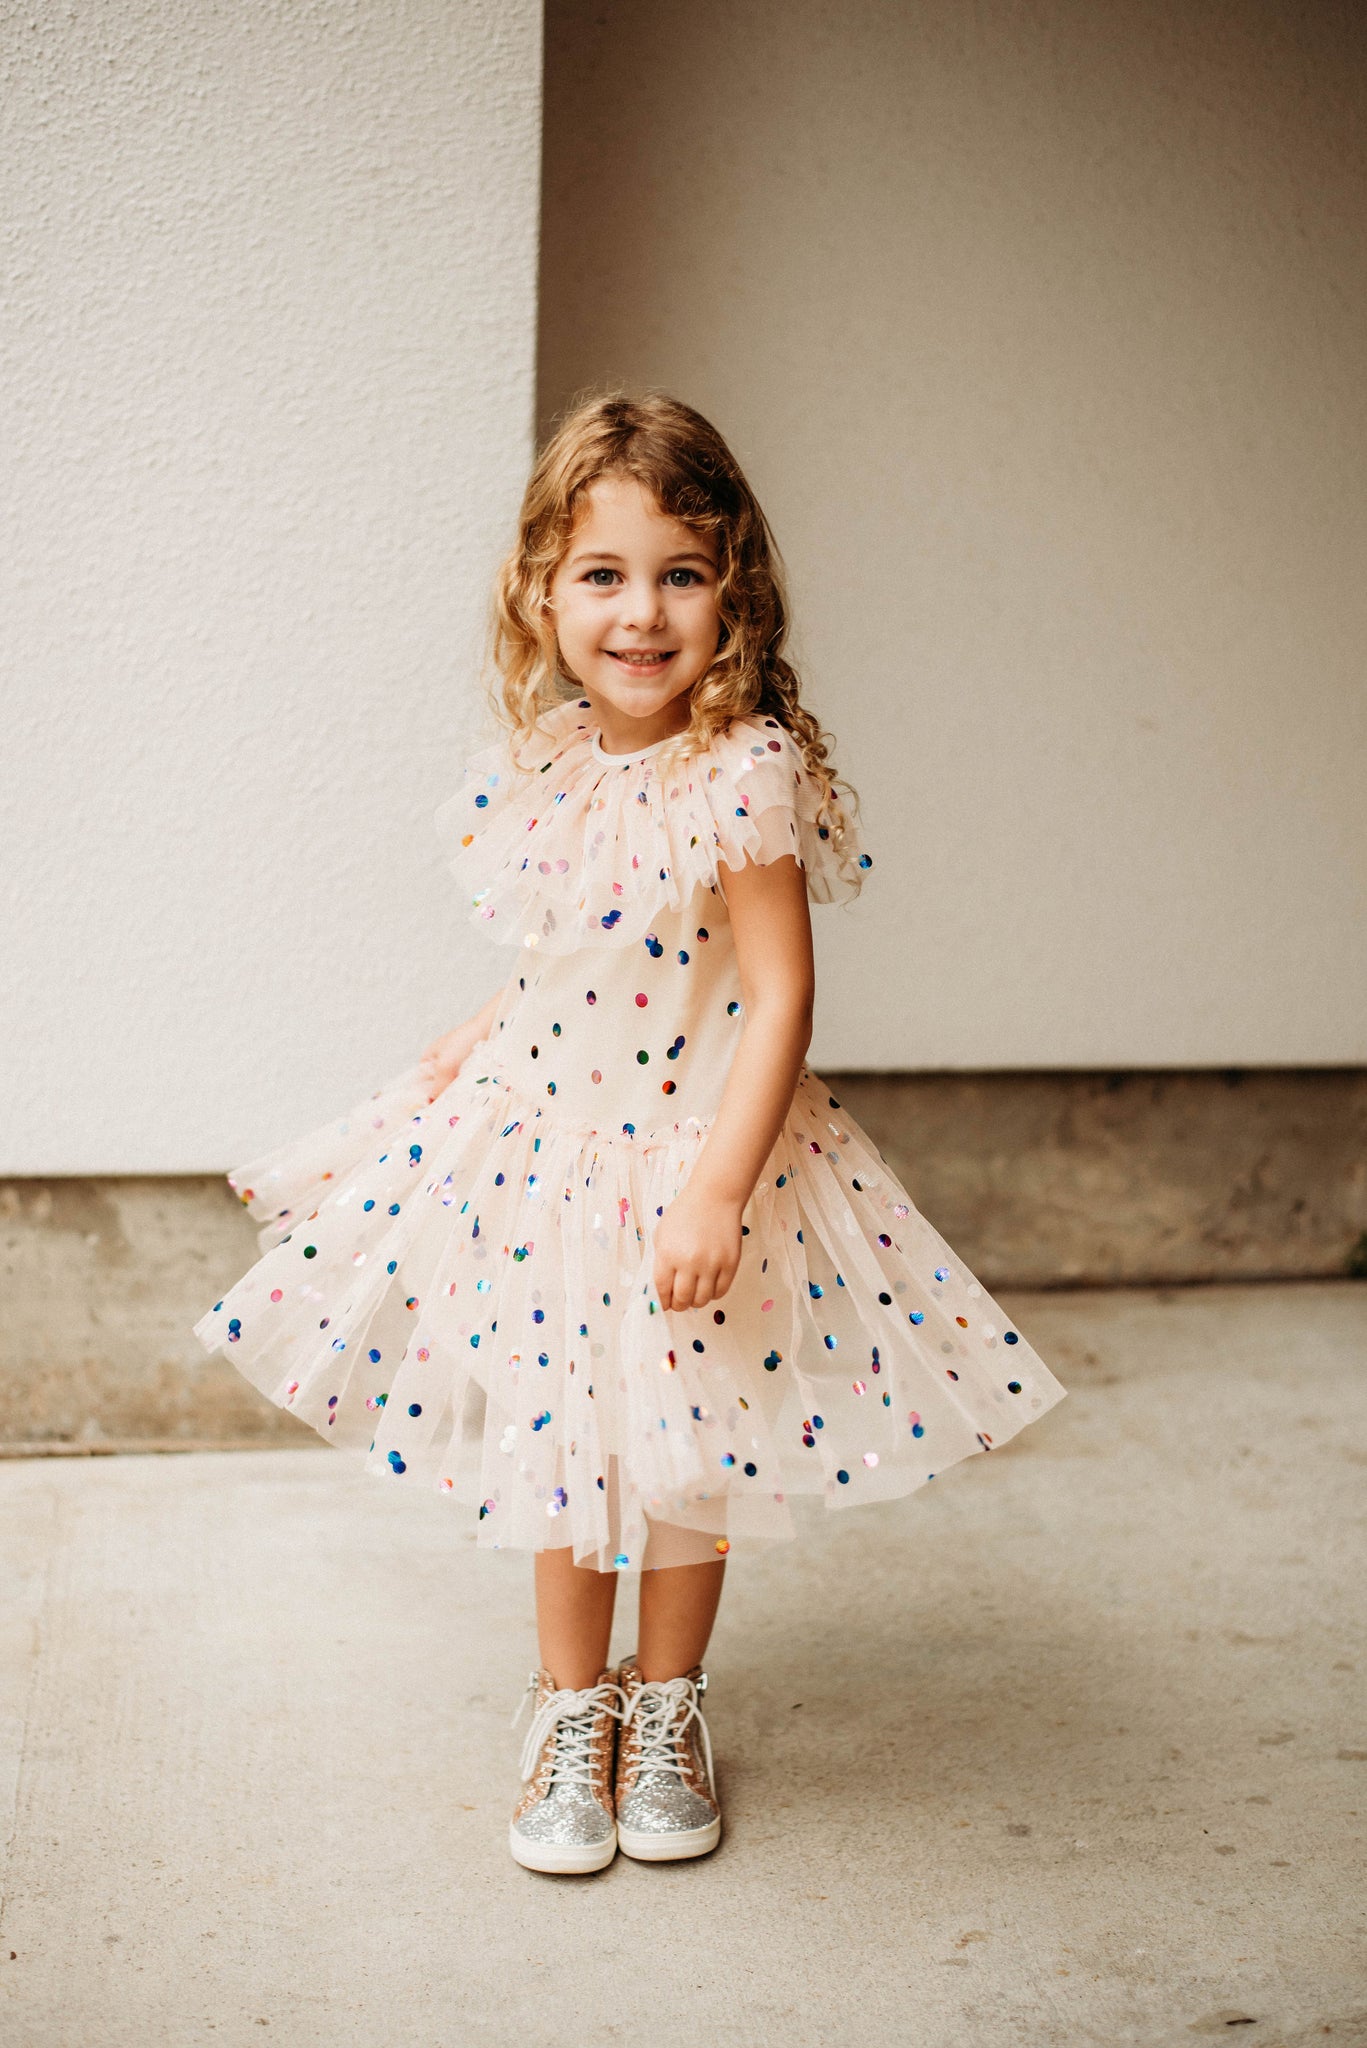 Girls Dresses Polka Dots Autumn Winter Long Sleeves Girl Clothes Casual  Kids Dress For Girls Tutu Party Children Clothing Wear From Oliveer, $35.97  | DHgate.Com